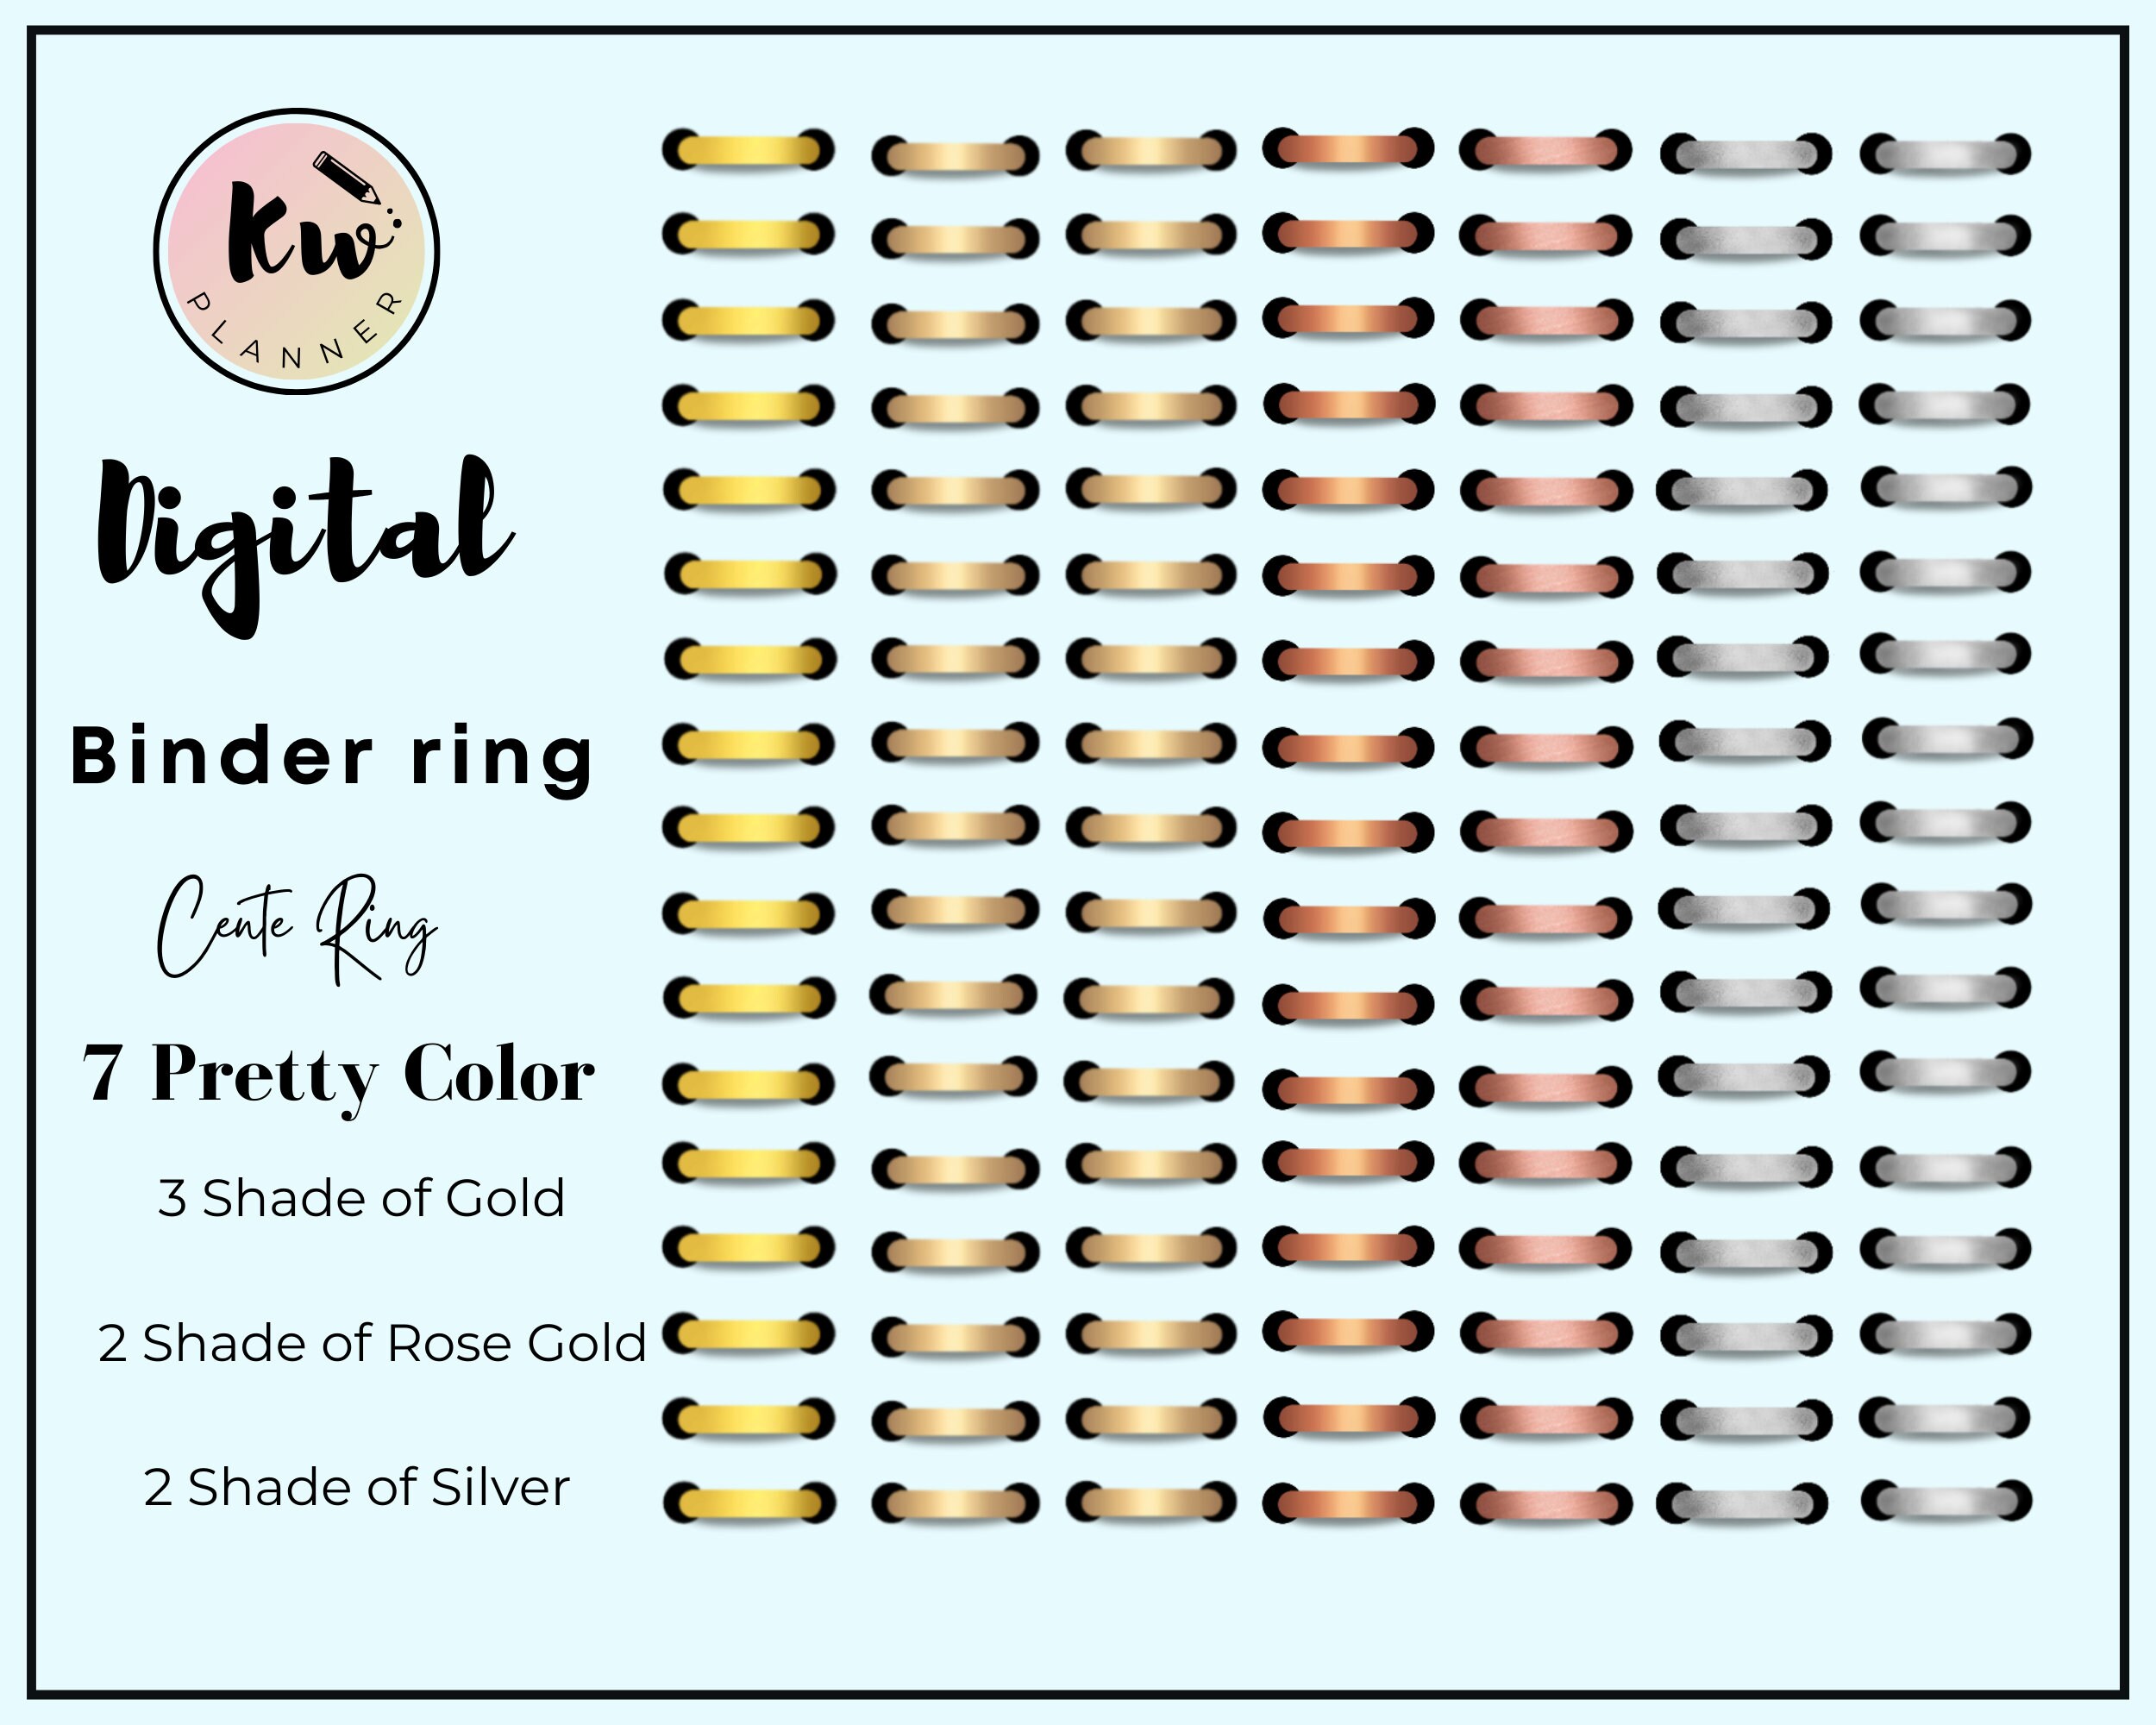 Digital Planner Binder Rings - Metallics - 7 Colors - Silver, Gold,  Champagne, Copper, Rose Gold - GoodNotes - Personal and Limited Use